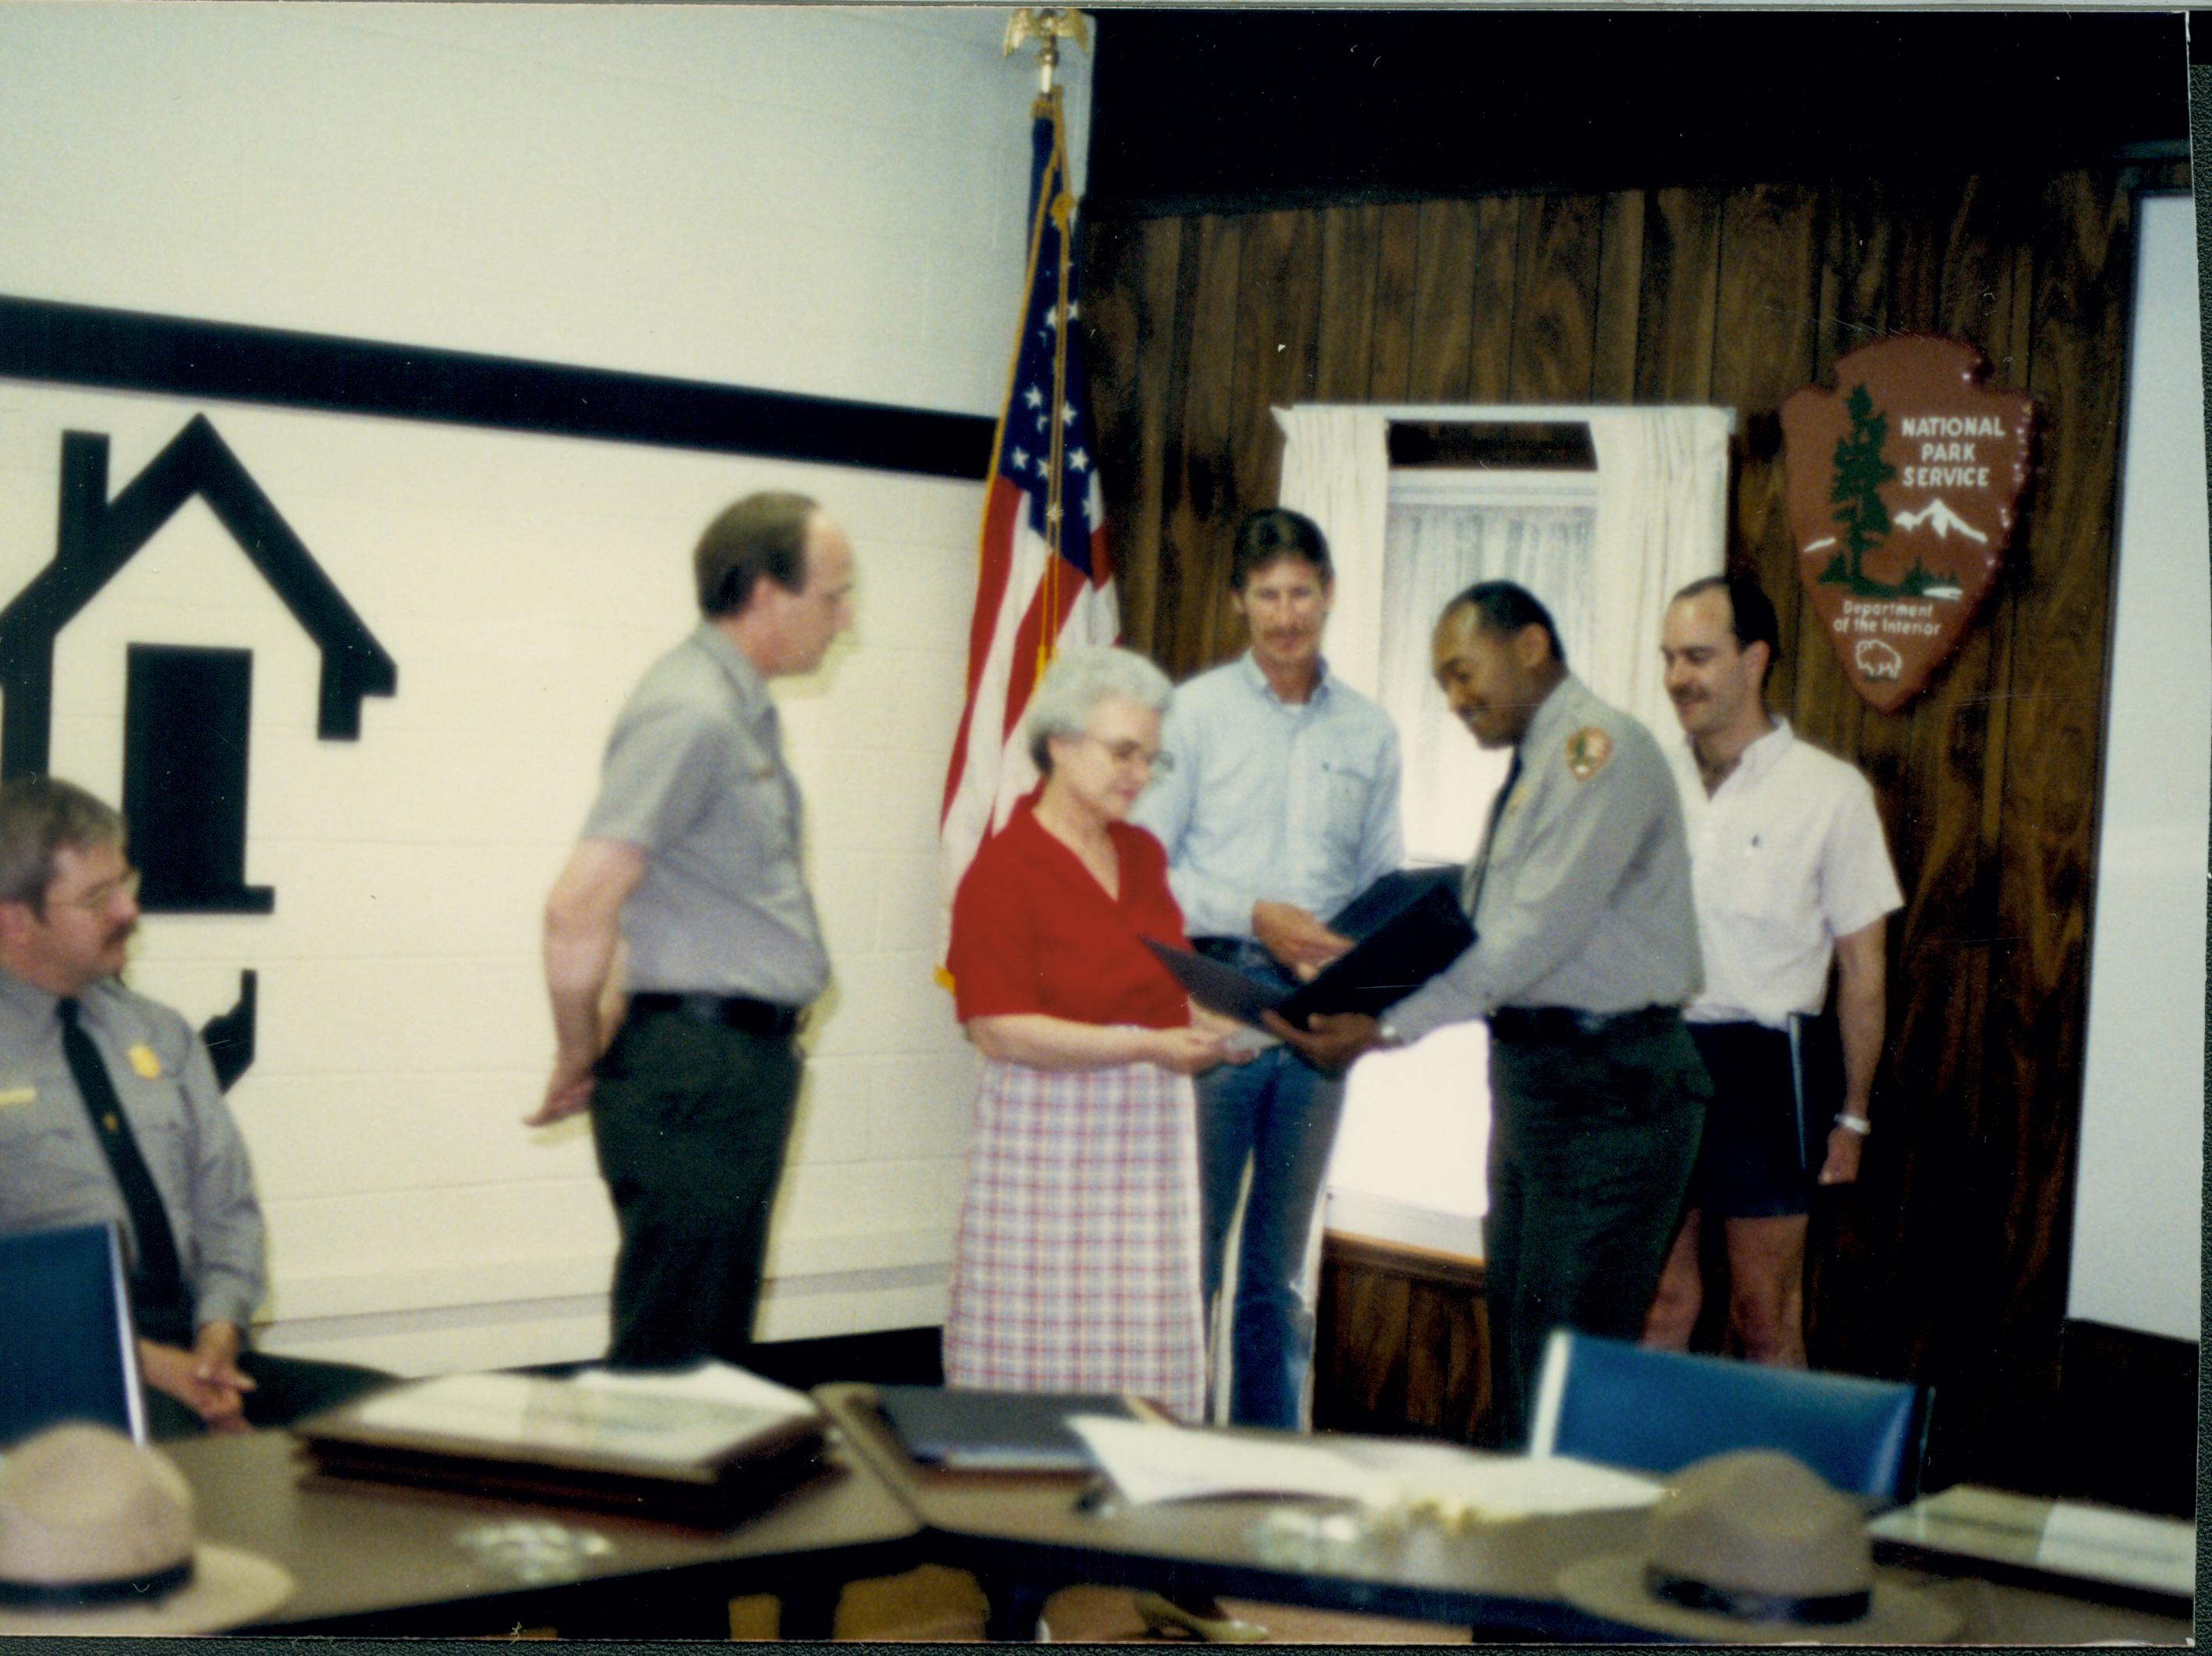 Awards Ceremony - Supt. Gentry Davis hands an award to Joyce Mavis as Rangers George Painter and Larry Blake watch, with Jason Hammond and Kelly Dodsworth. Looking Southwest in Conference Center, second floor staff, Conference Center, awards